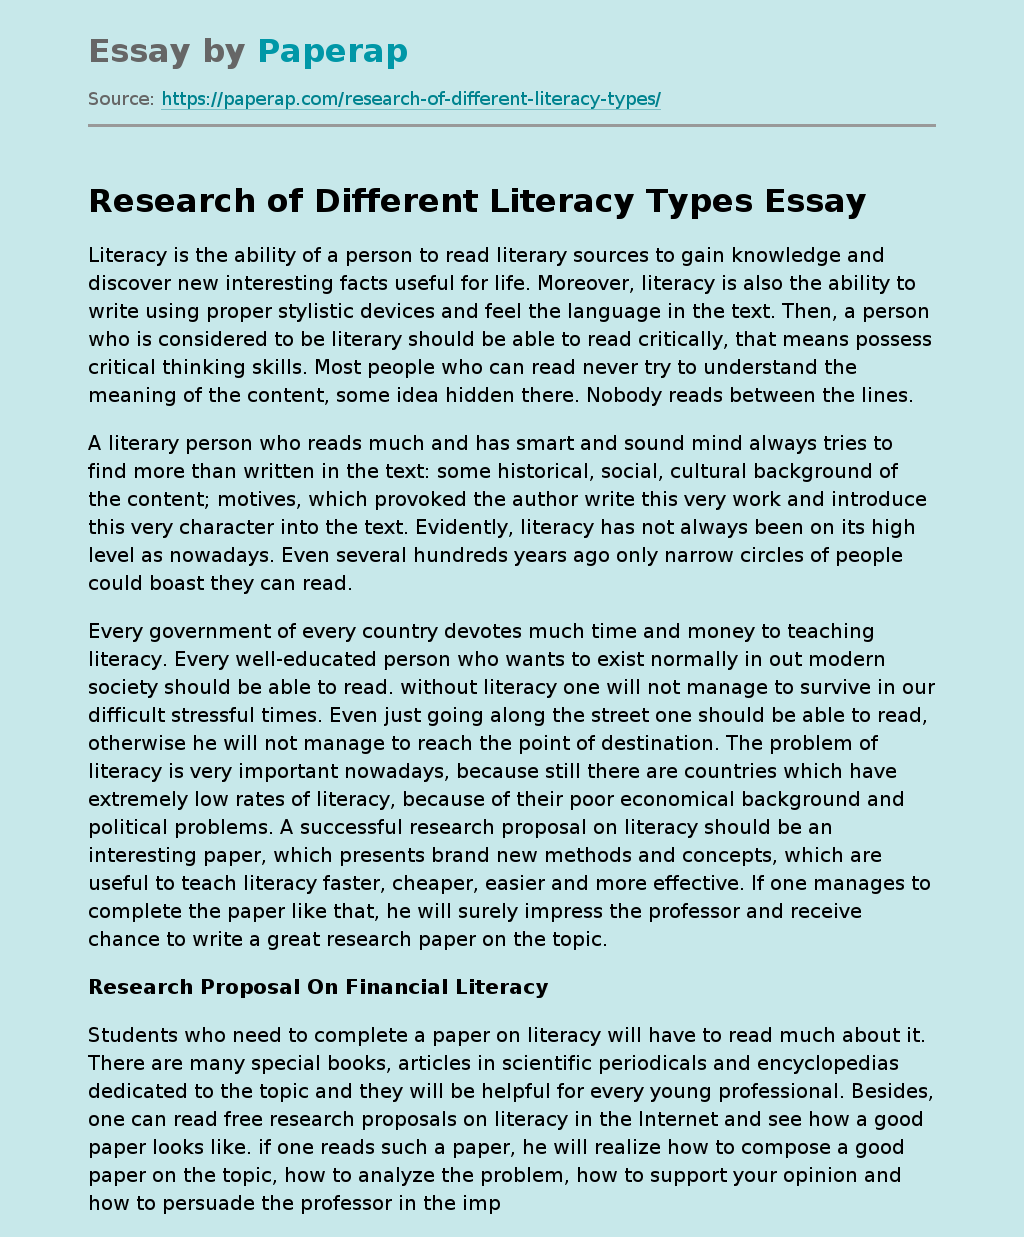 Research of Different Literacy Types